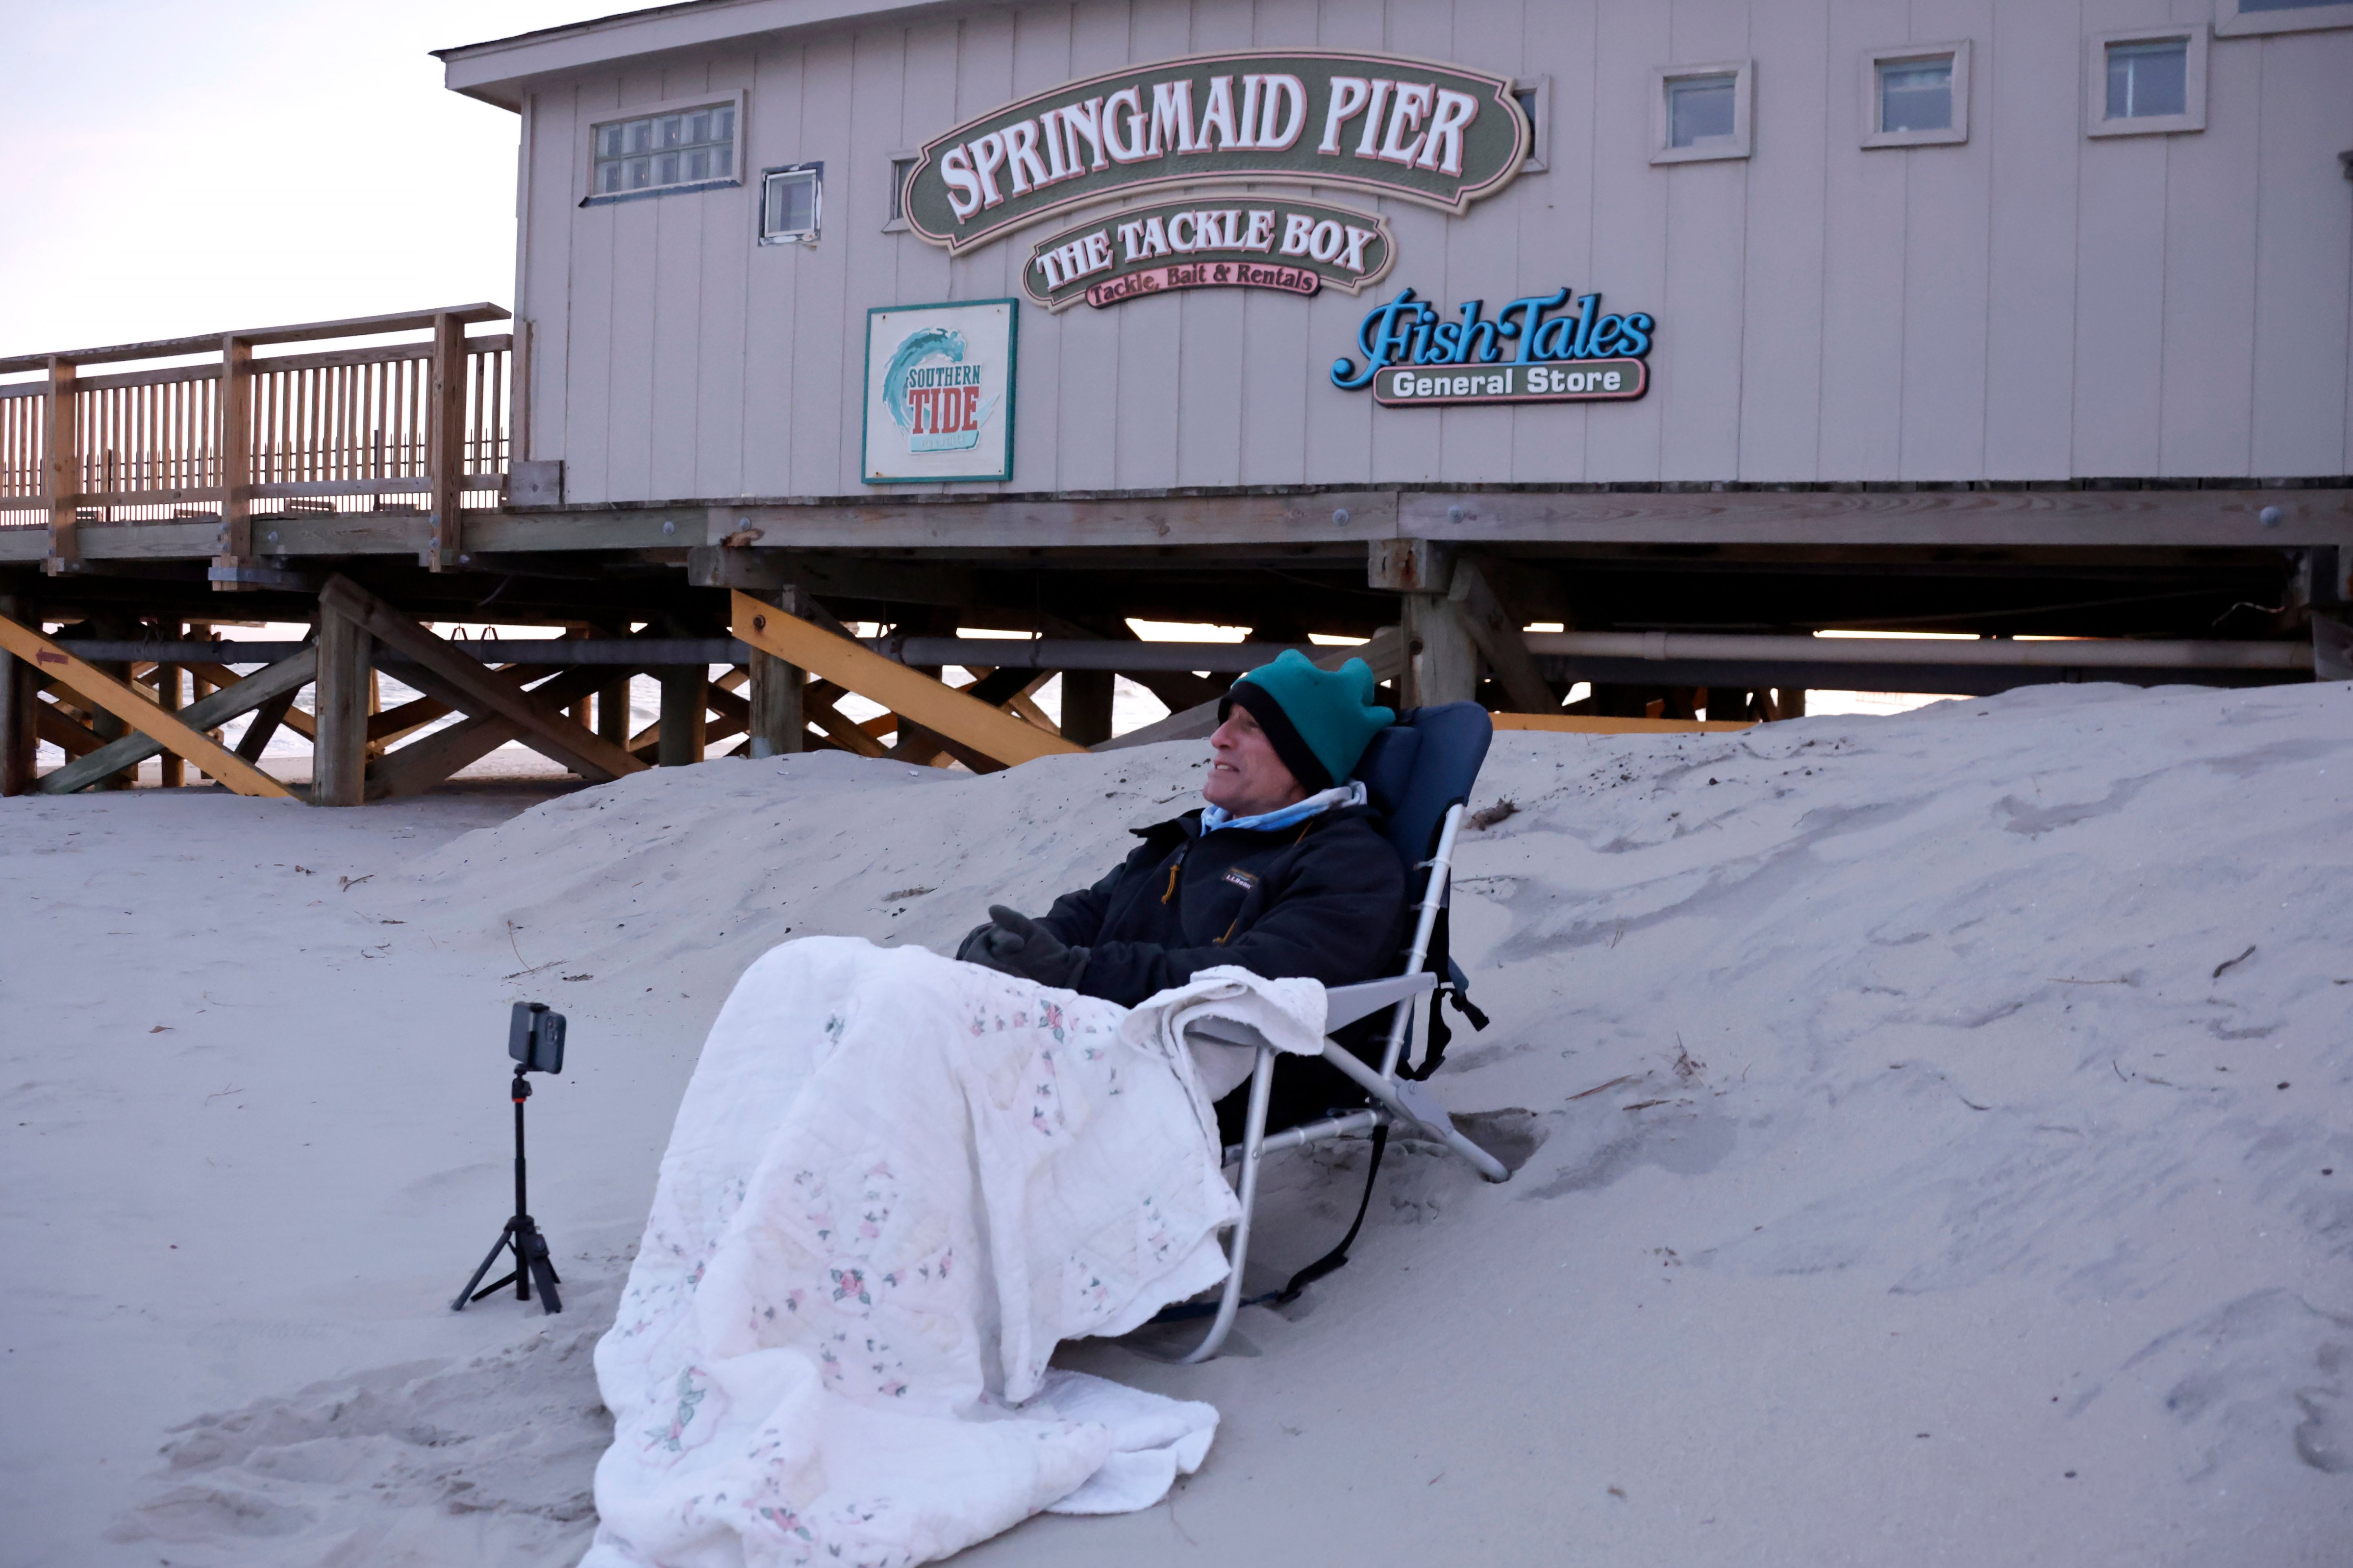 Local Peter Flynn sits near the Springmaid Pier in Myrtle Beach, S.C., Saturday, Feb. 4, 2023. He witnessed the Chinese balloon getting shot down in the area earlier in the day. (Chris Seward—AP Photo)